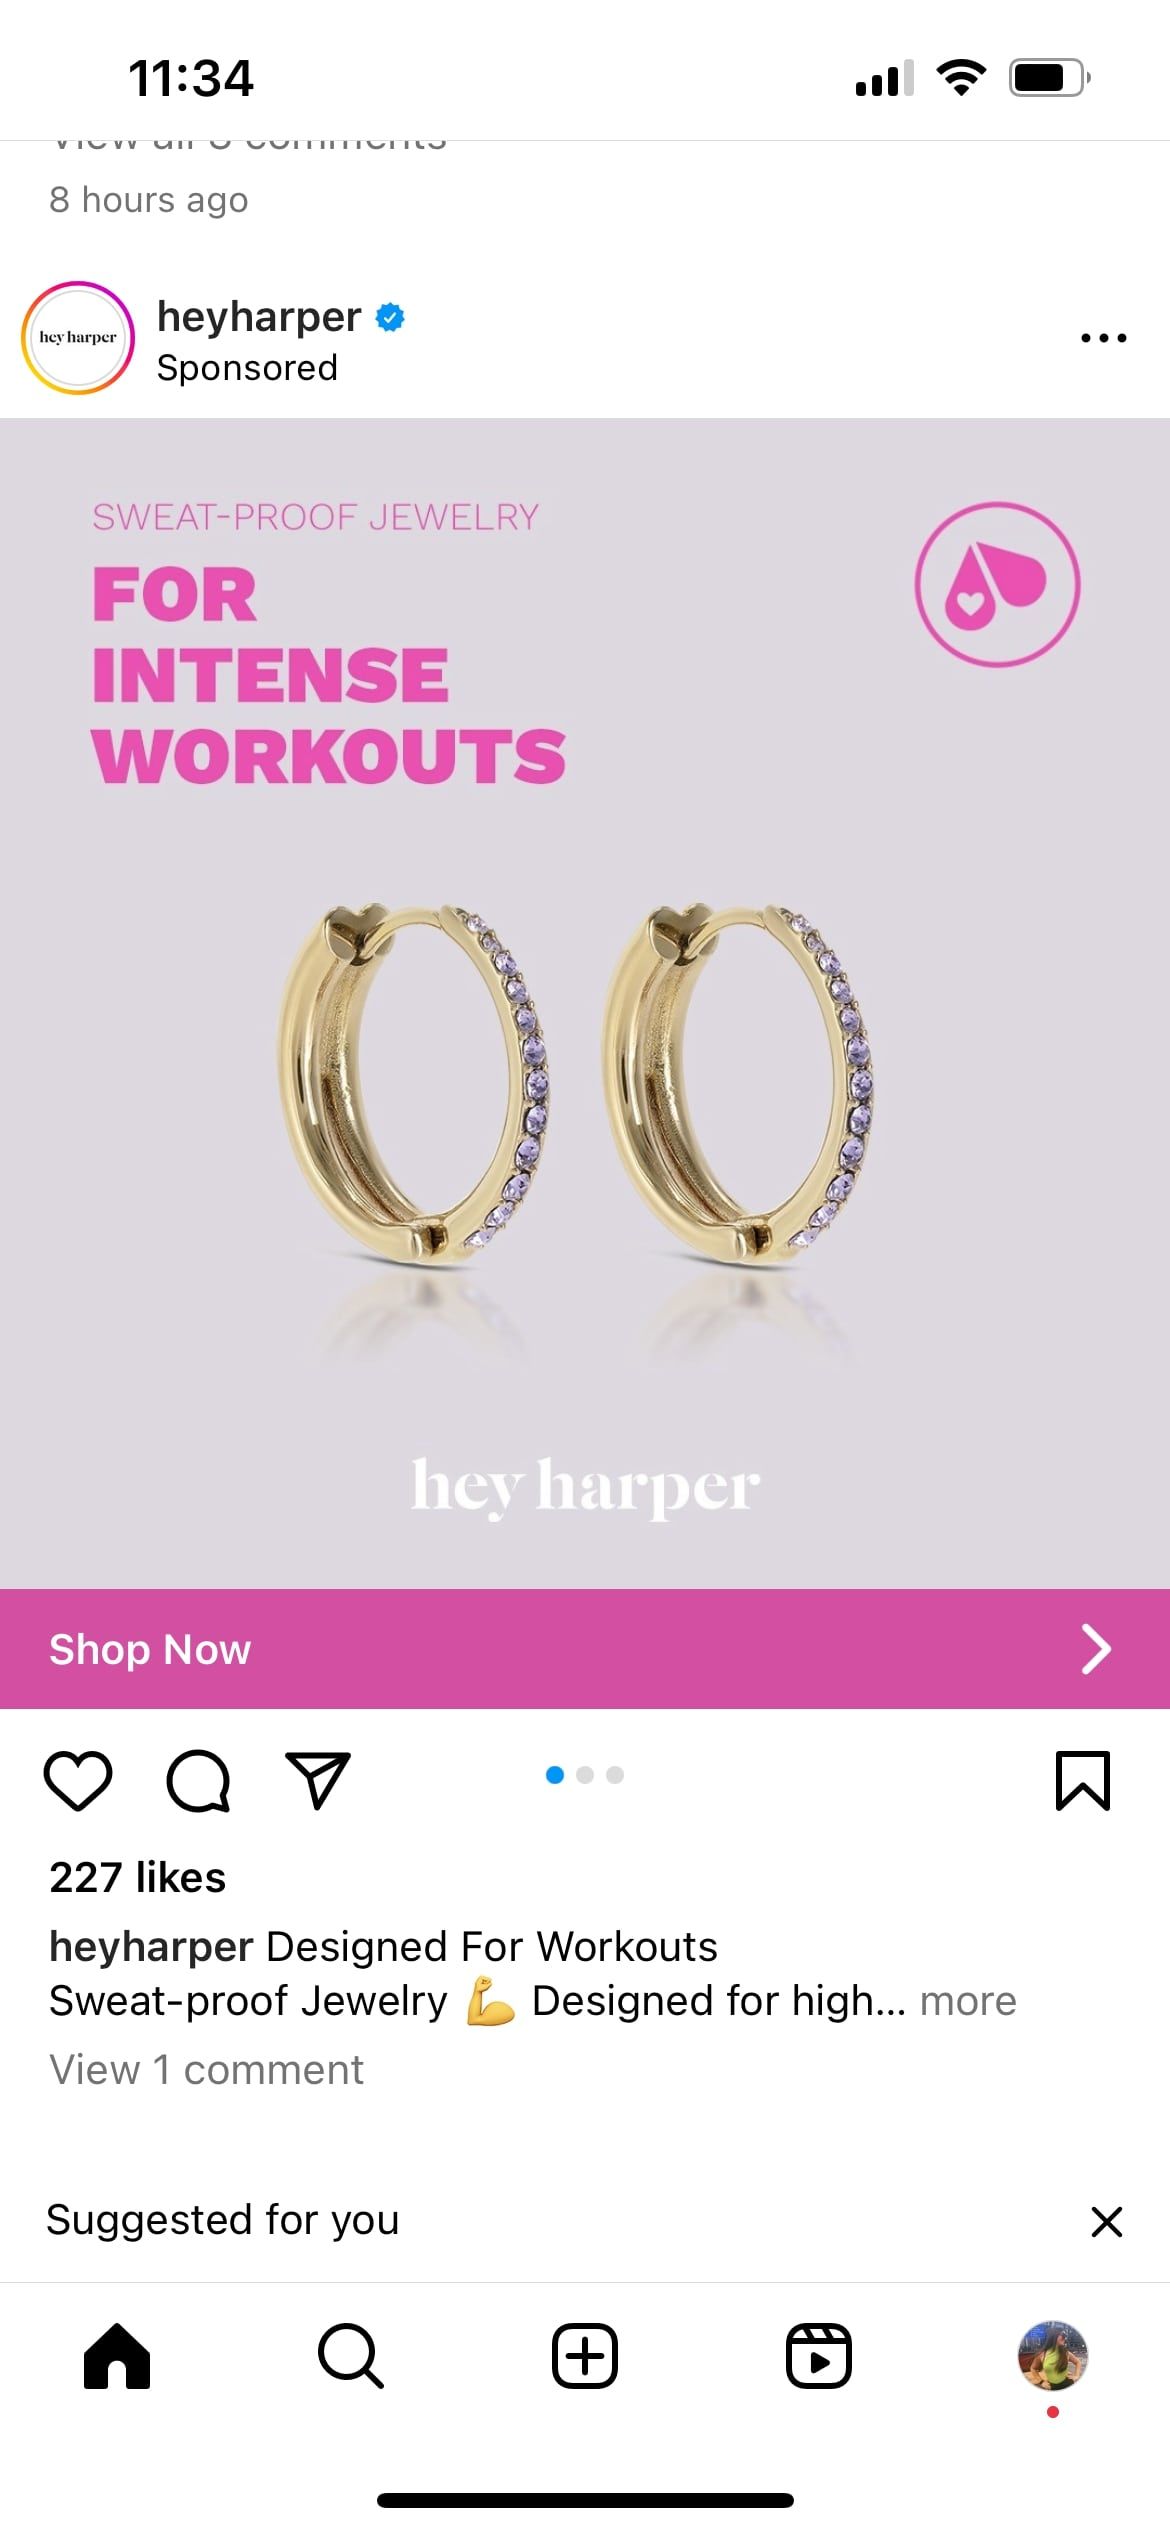 Instagram ad with link